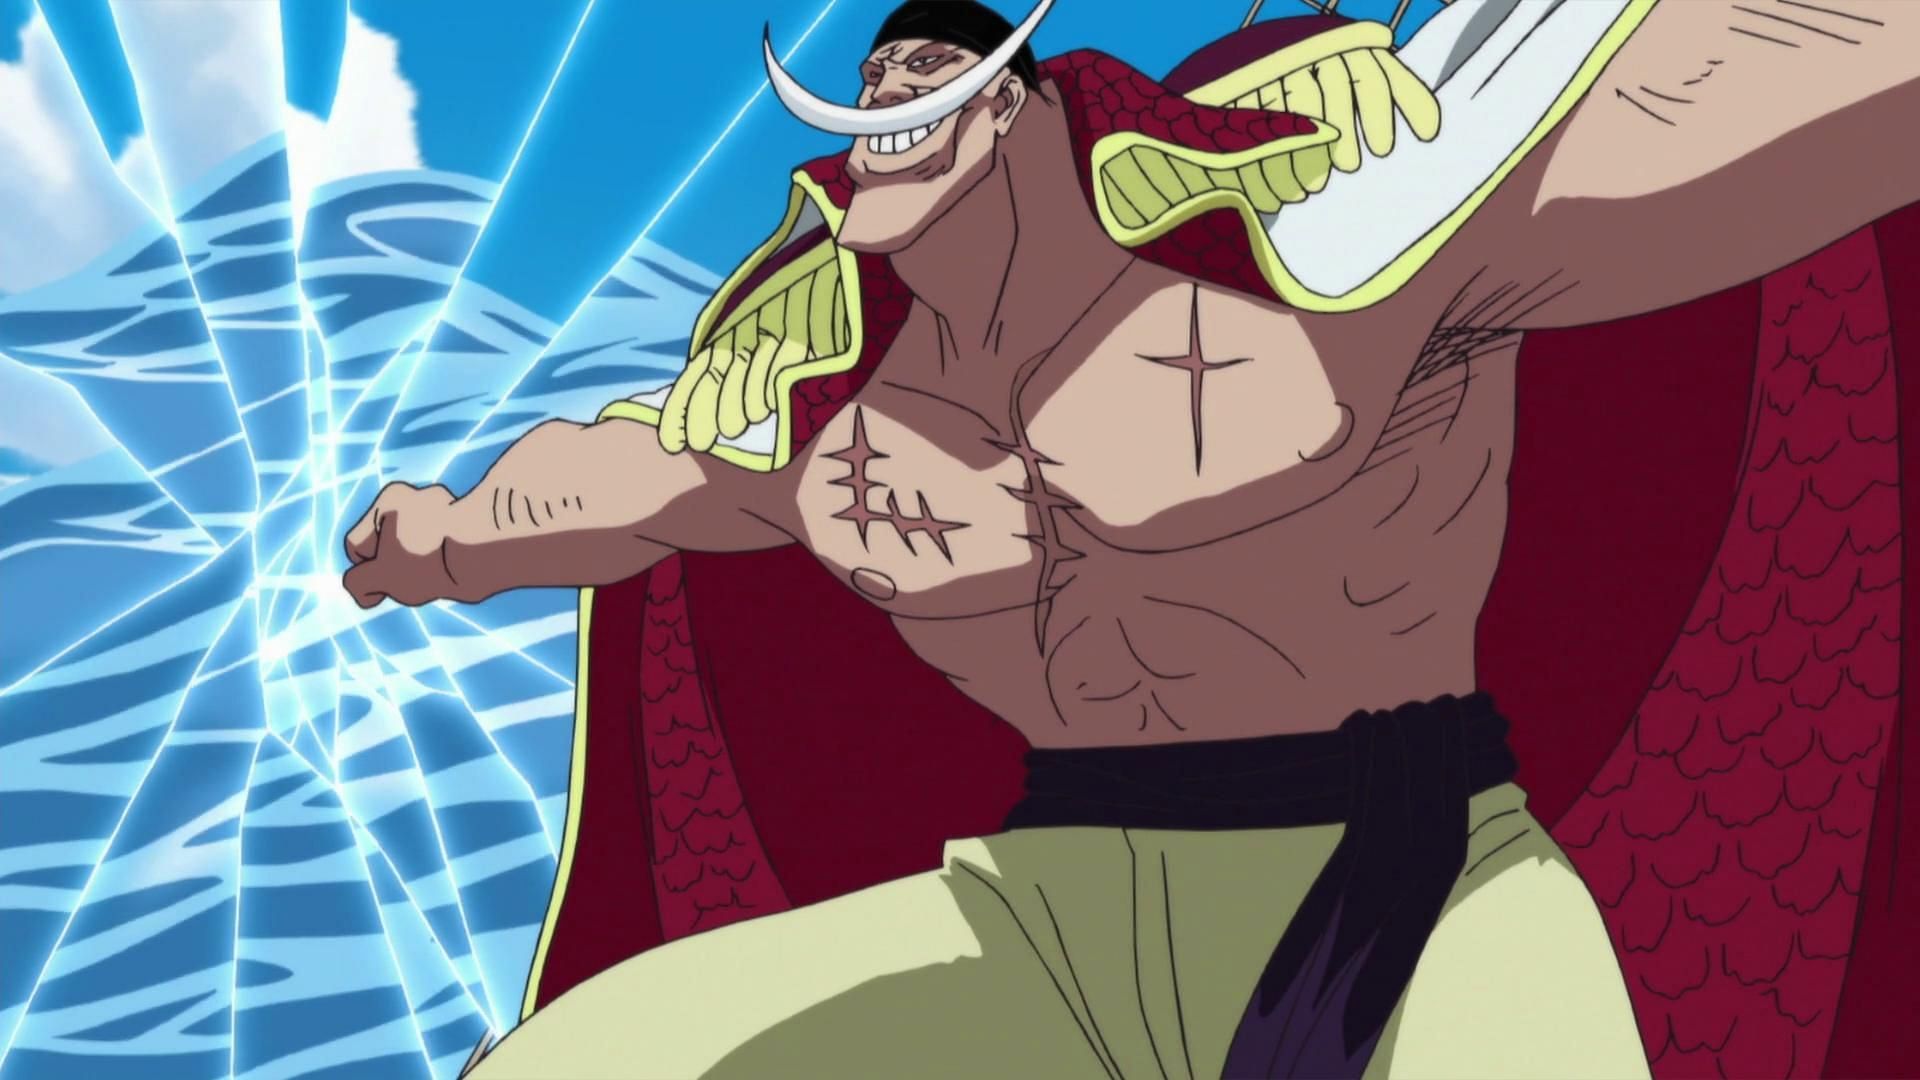 All One Piece characters listed by age, from youngest to oldest